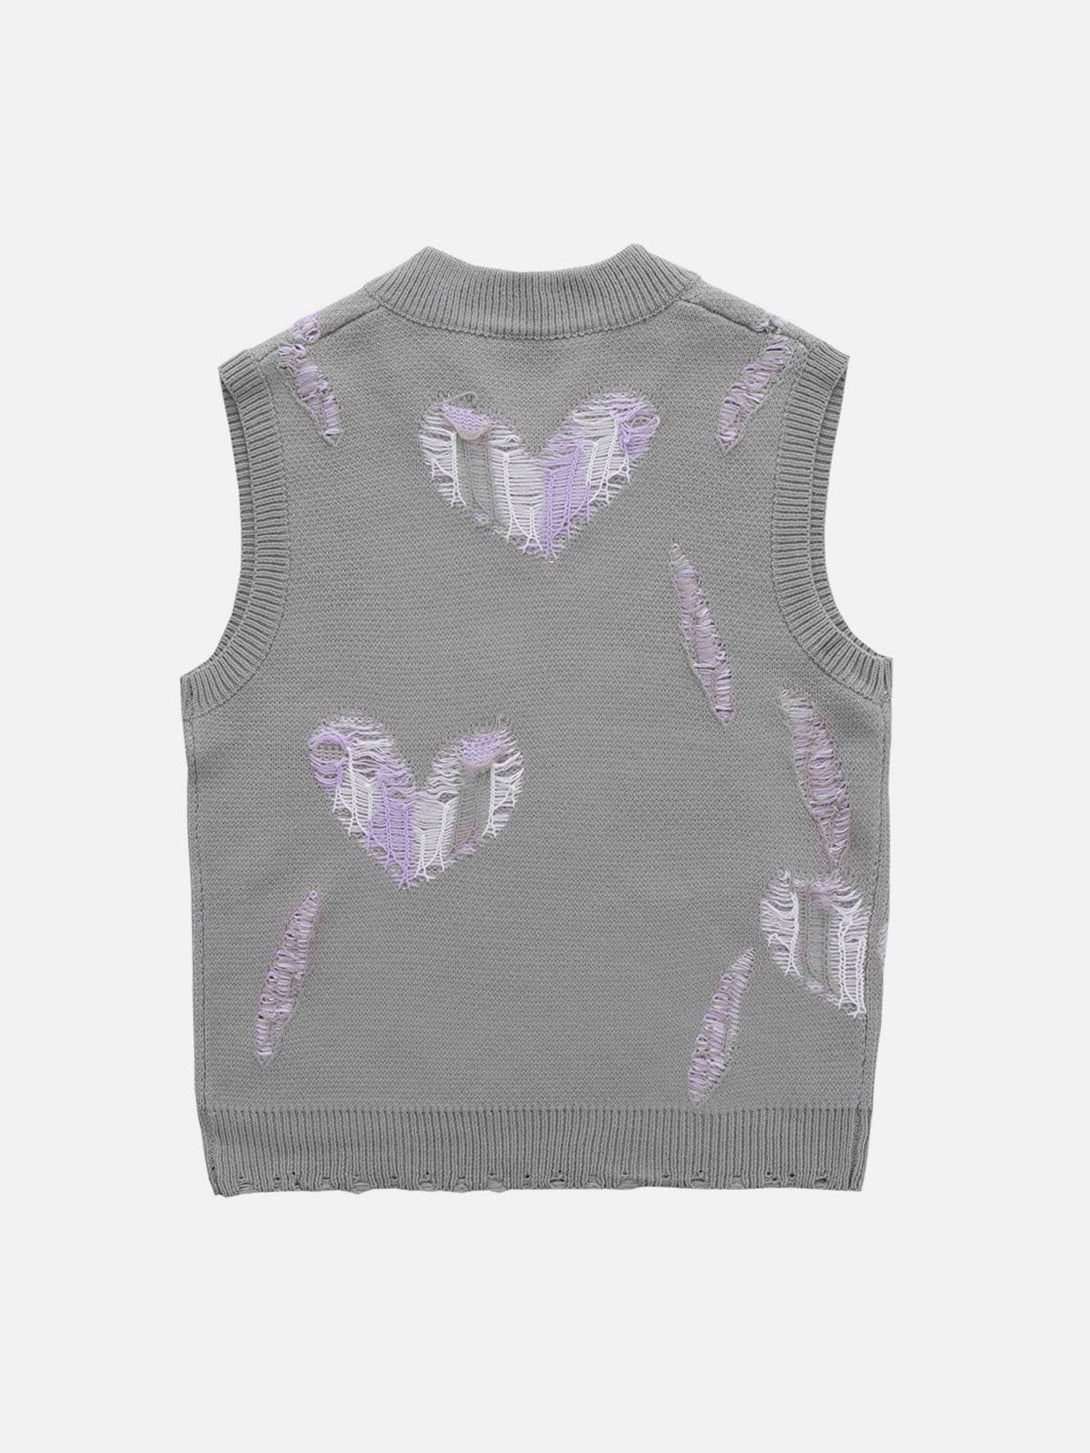 Majesda® - Love Embroidery Sweater Vest outfit ideas streetwear fashion